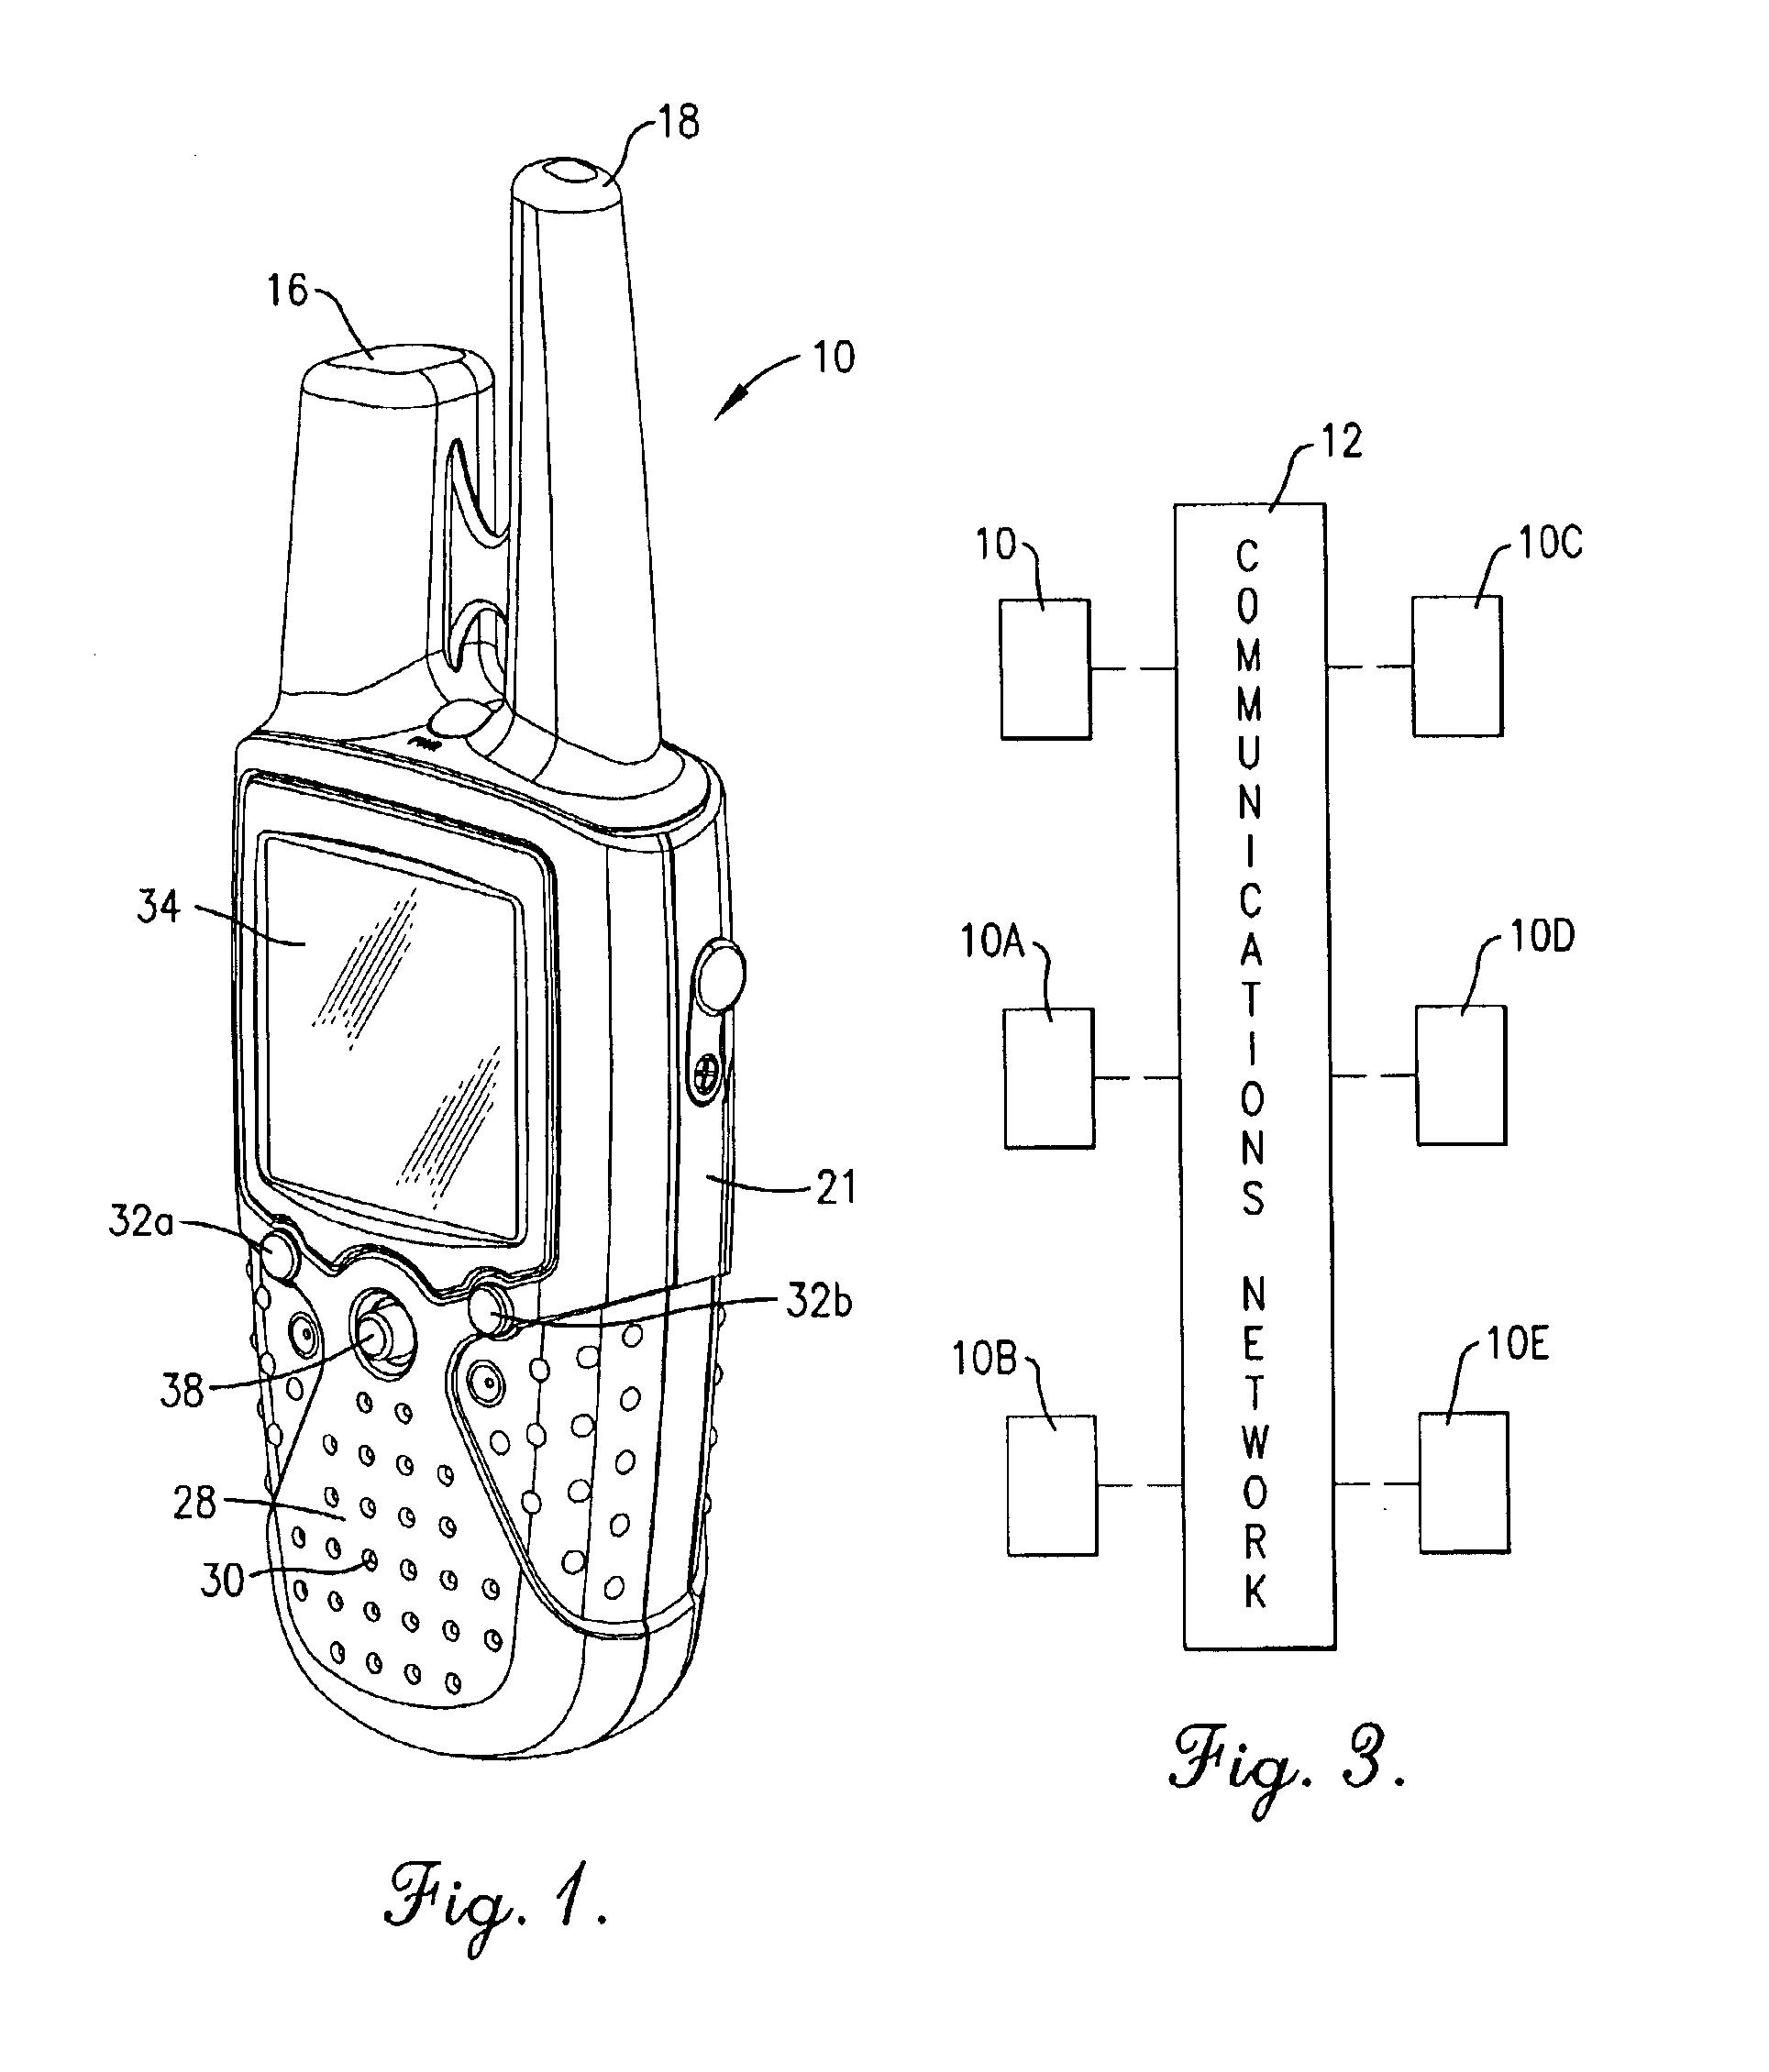 Combined global positioning system receiver and radio with enhanced display features